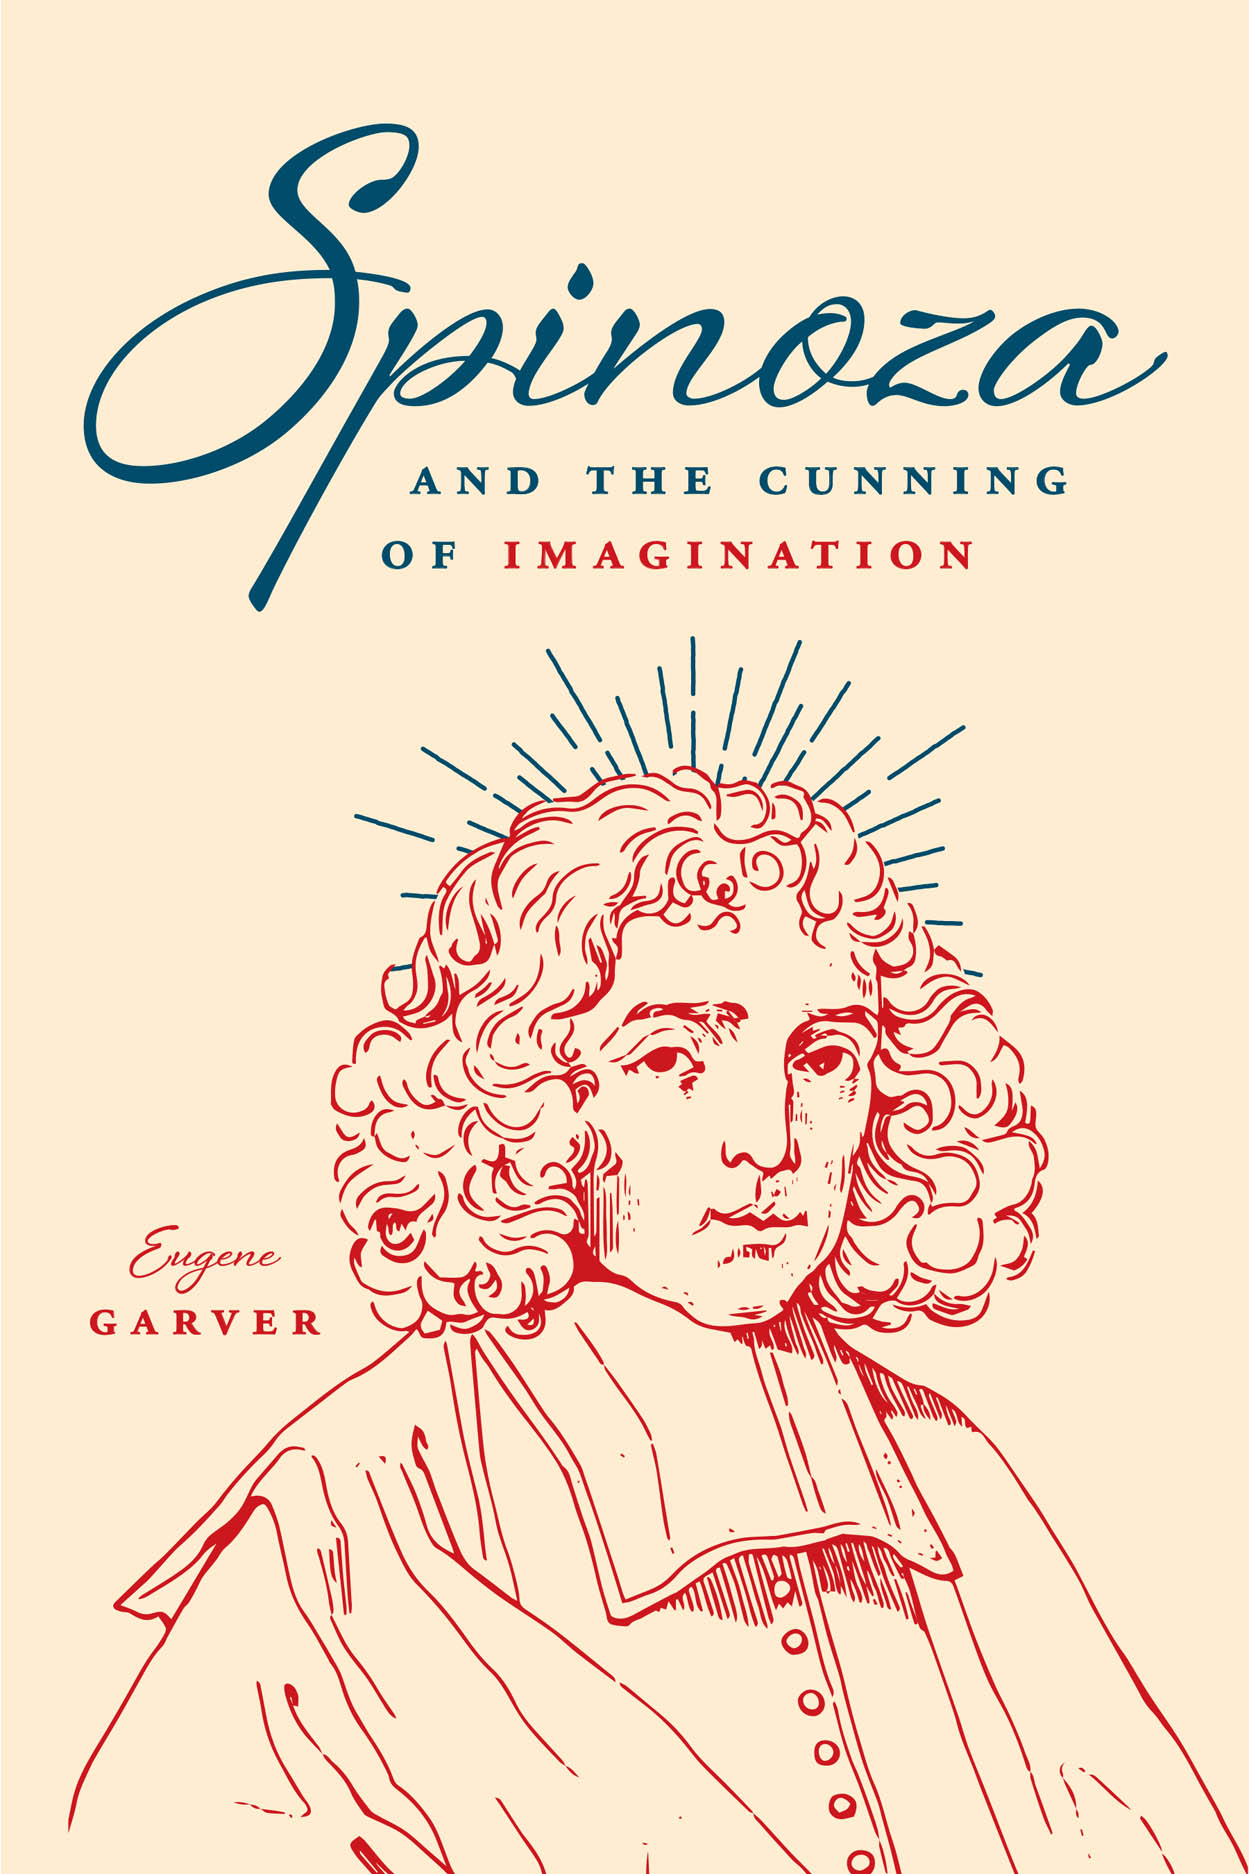 Spinoza and the Cunning of Imagination